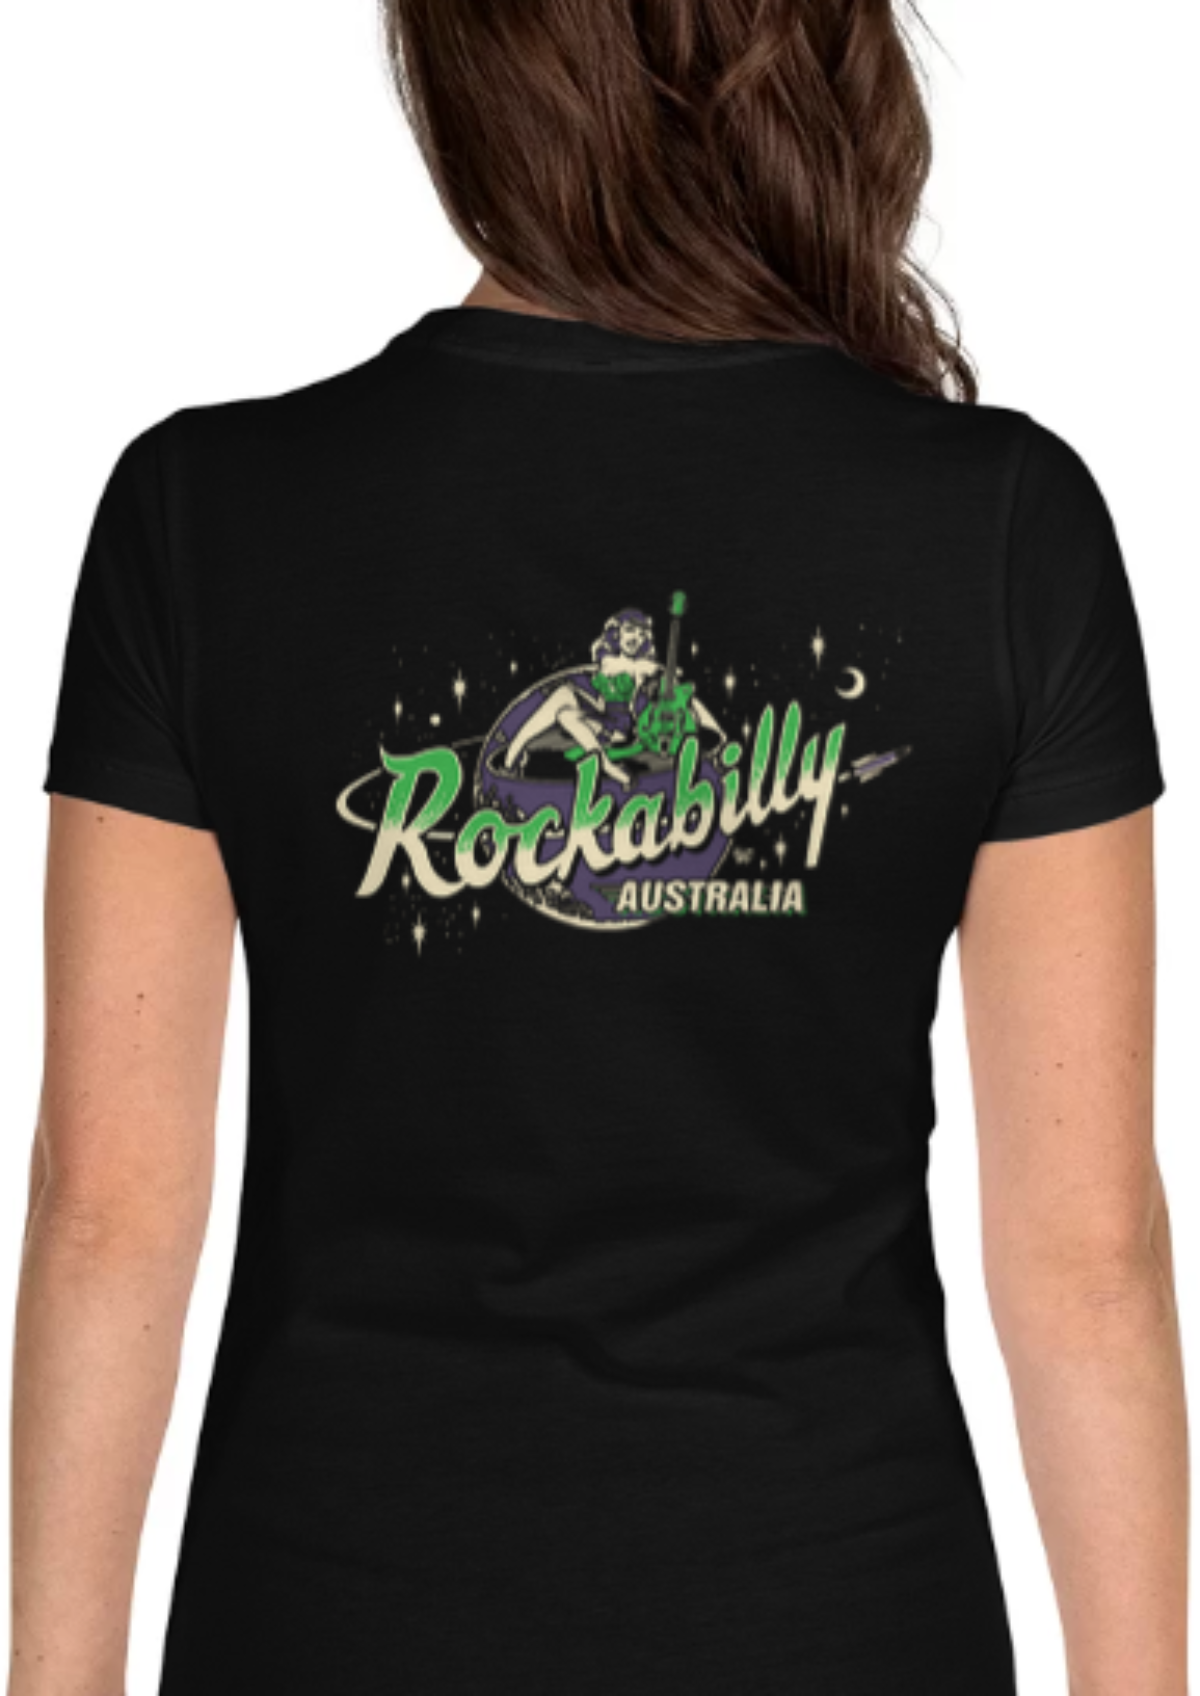 Show off your love for rockabilly and look great in one of our super comfortable 100% cotton 